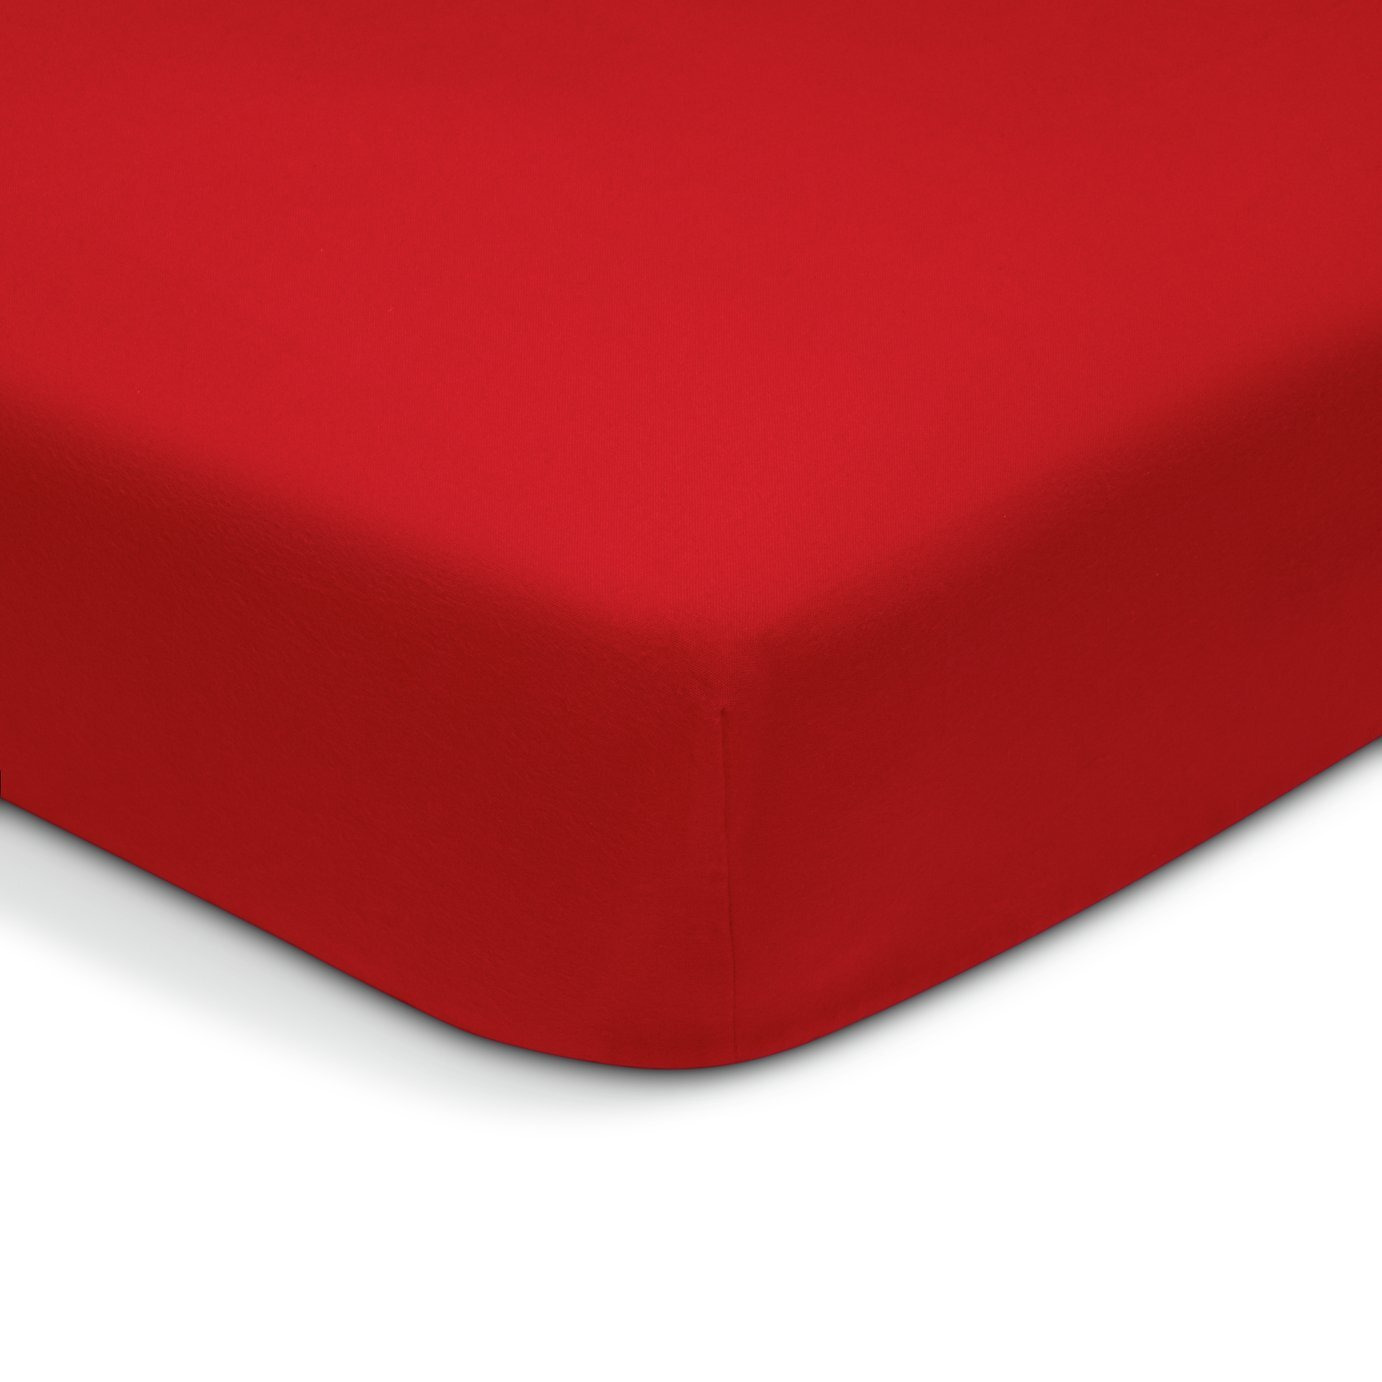 Habitat Brushed Cotton Red Fitted Sheet - Single - image 1